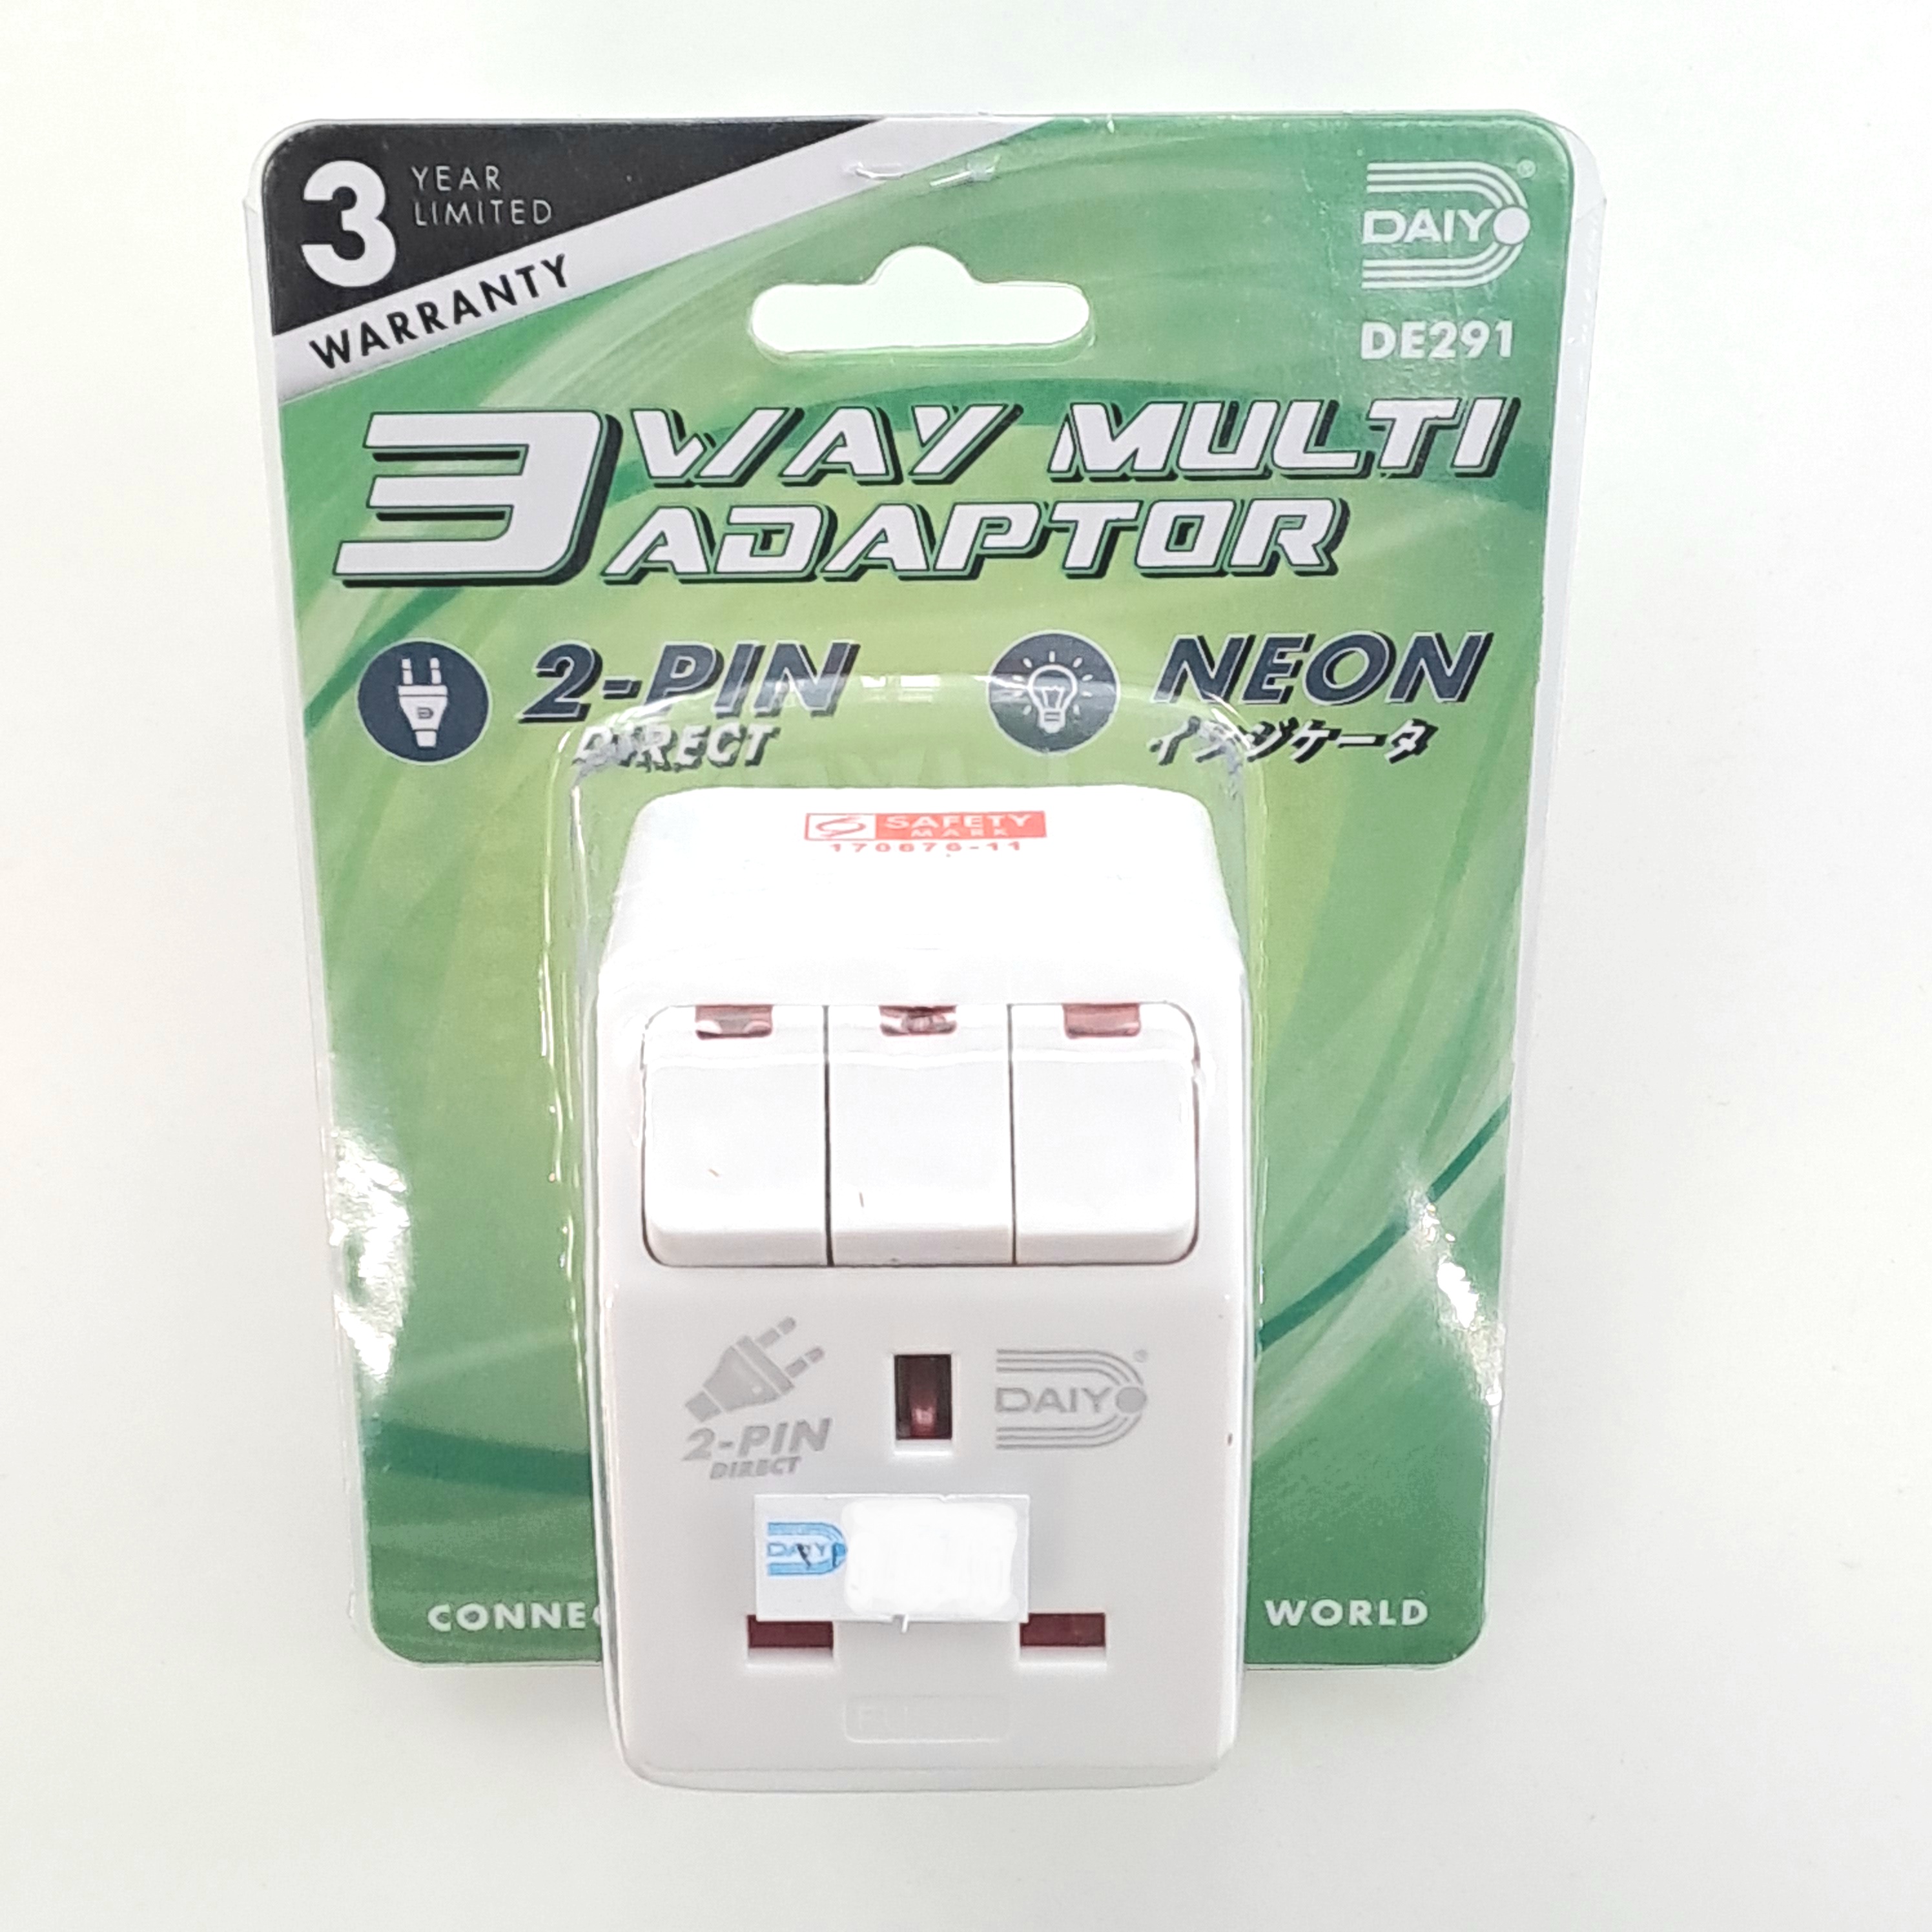 3 Way Multi Adaptor With Switch & Neon